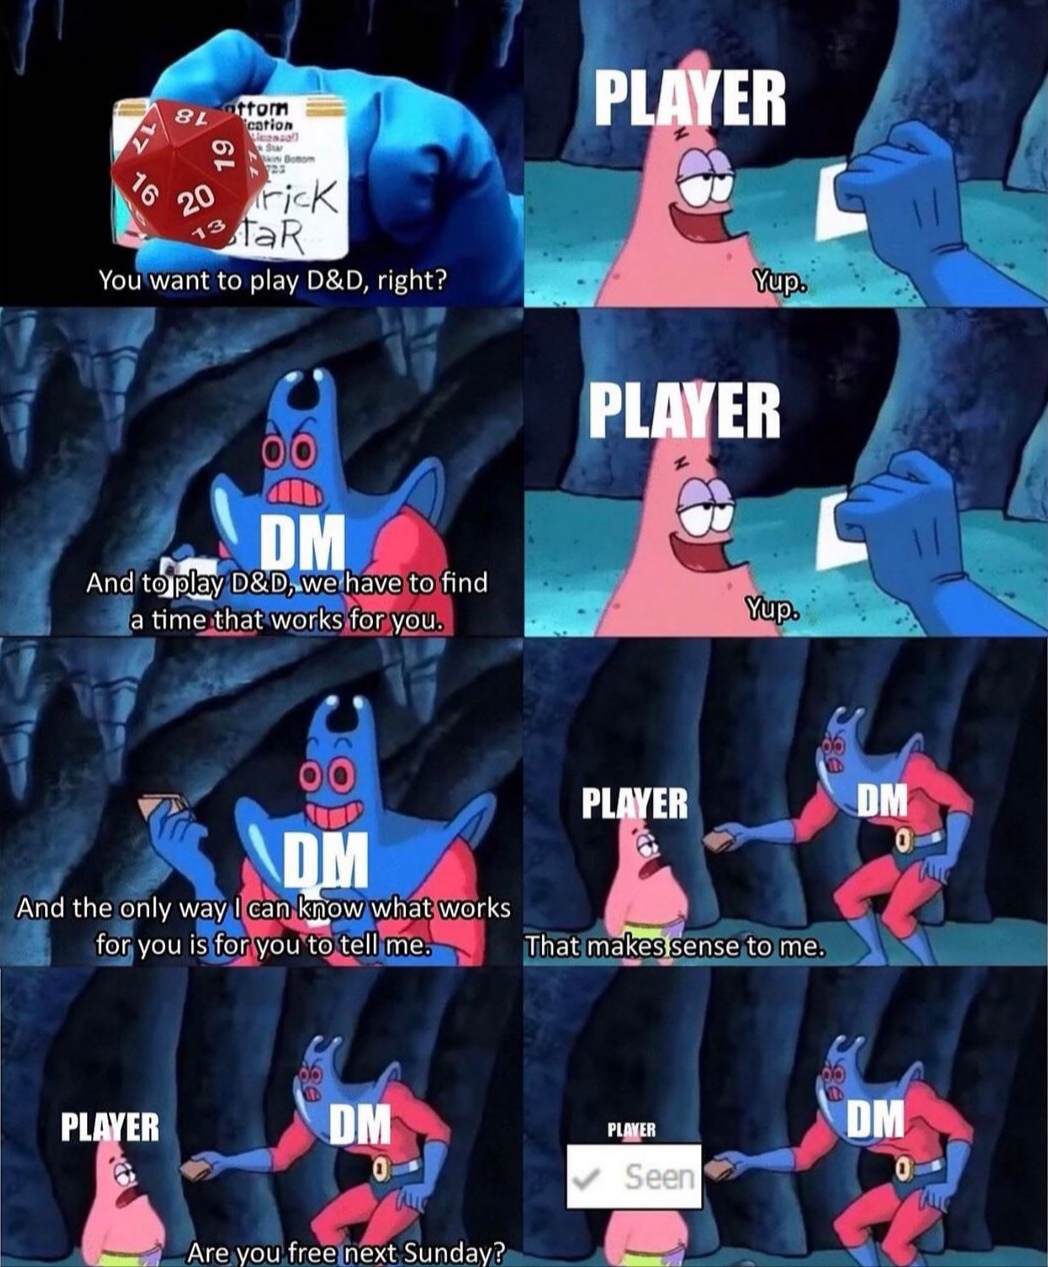 spongebob lion king meme - Player form O 20 riK AaR You want to play D&D, right? Yup. Player 0 0 Lum And to play D&D, we have to find a time that works for you. Yup. 00 Player Dm Im And the only way I can know what works for you is for you to tell me. Tha